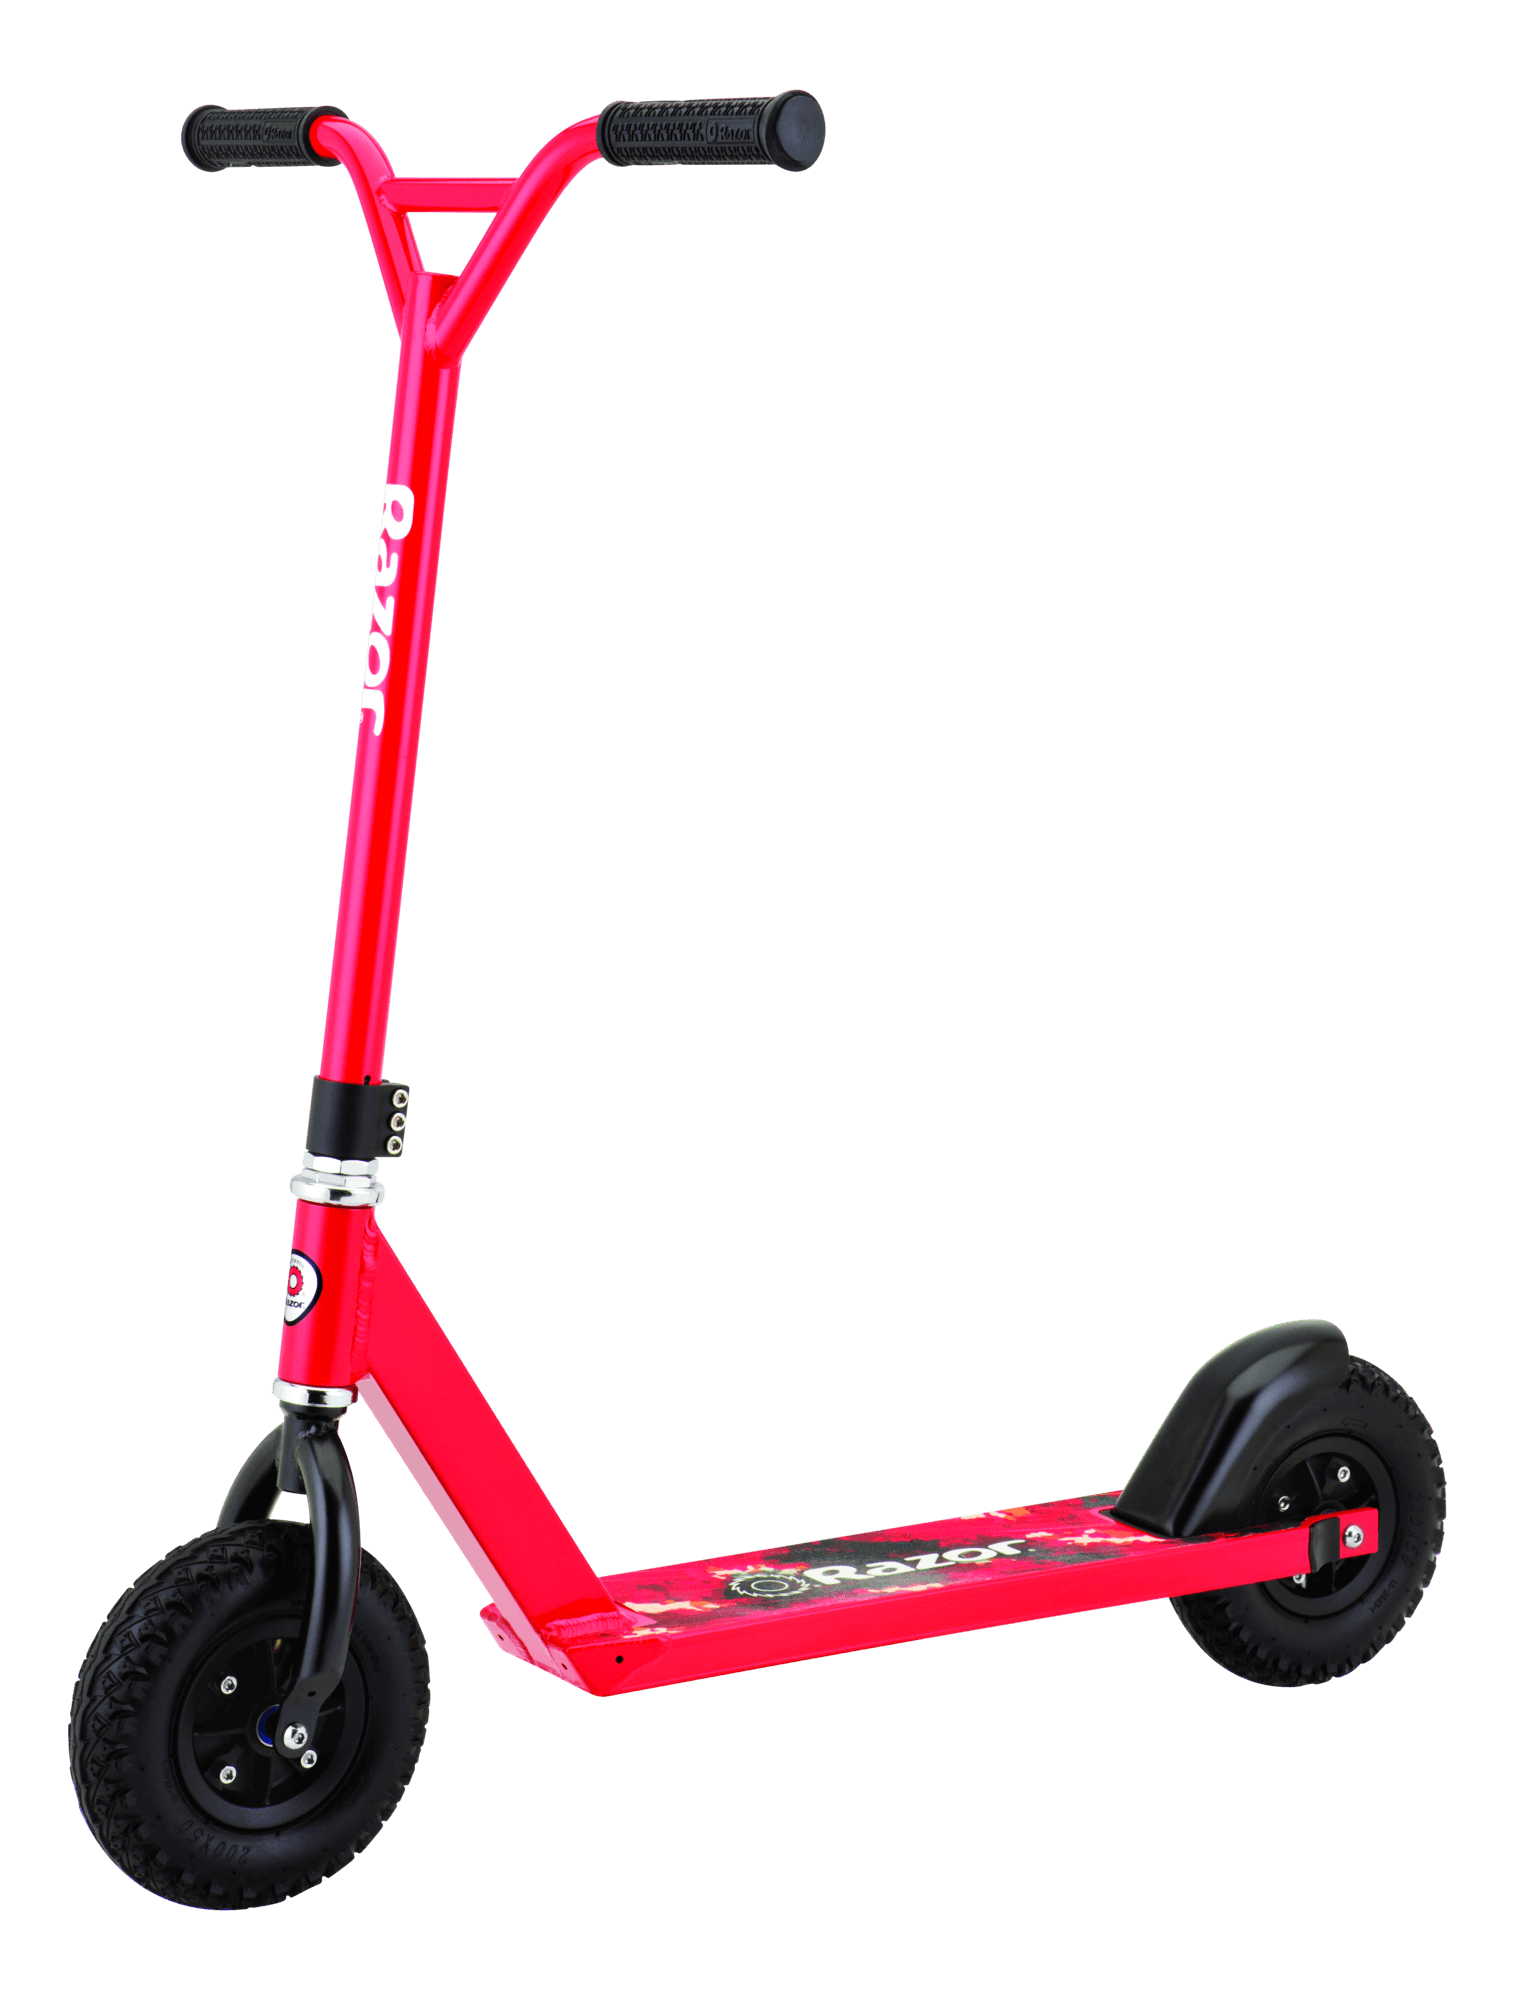 Kick Scooter PNG Image with Transparent Background